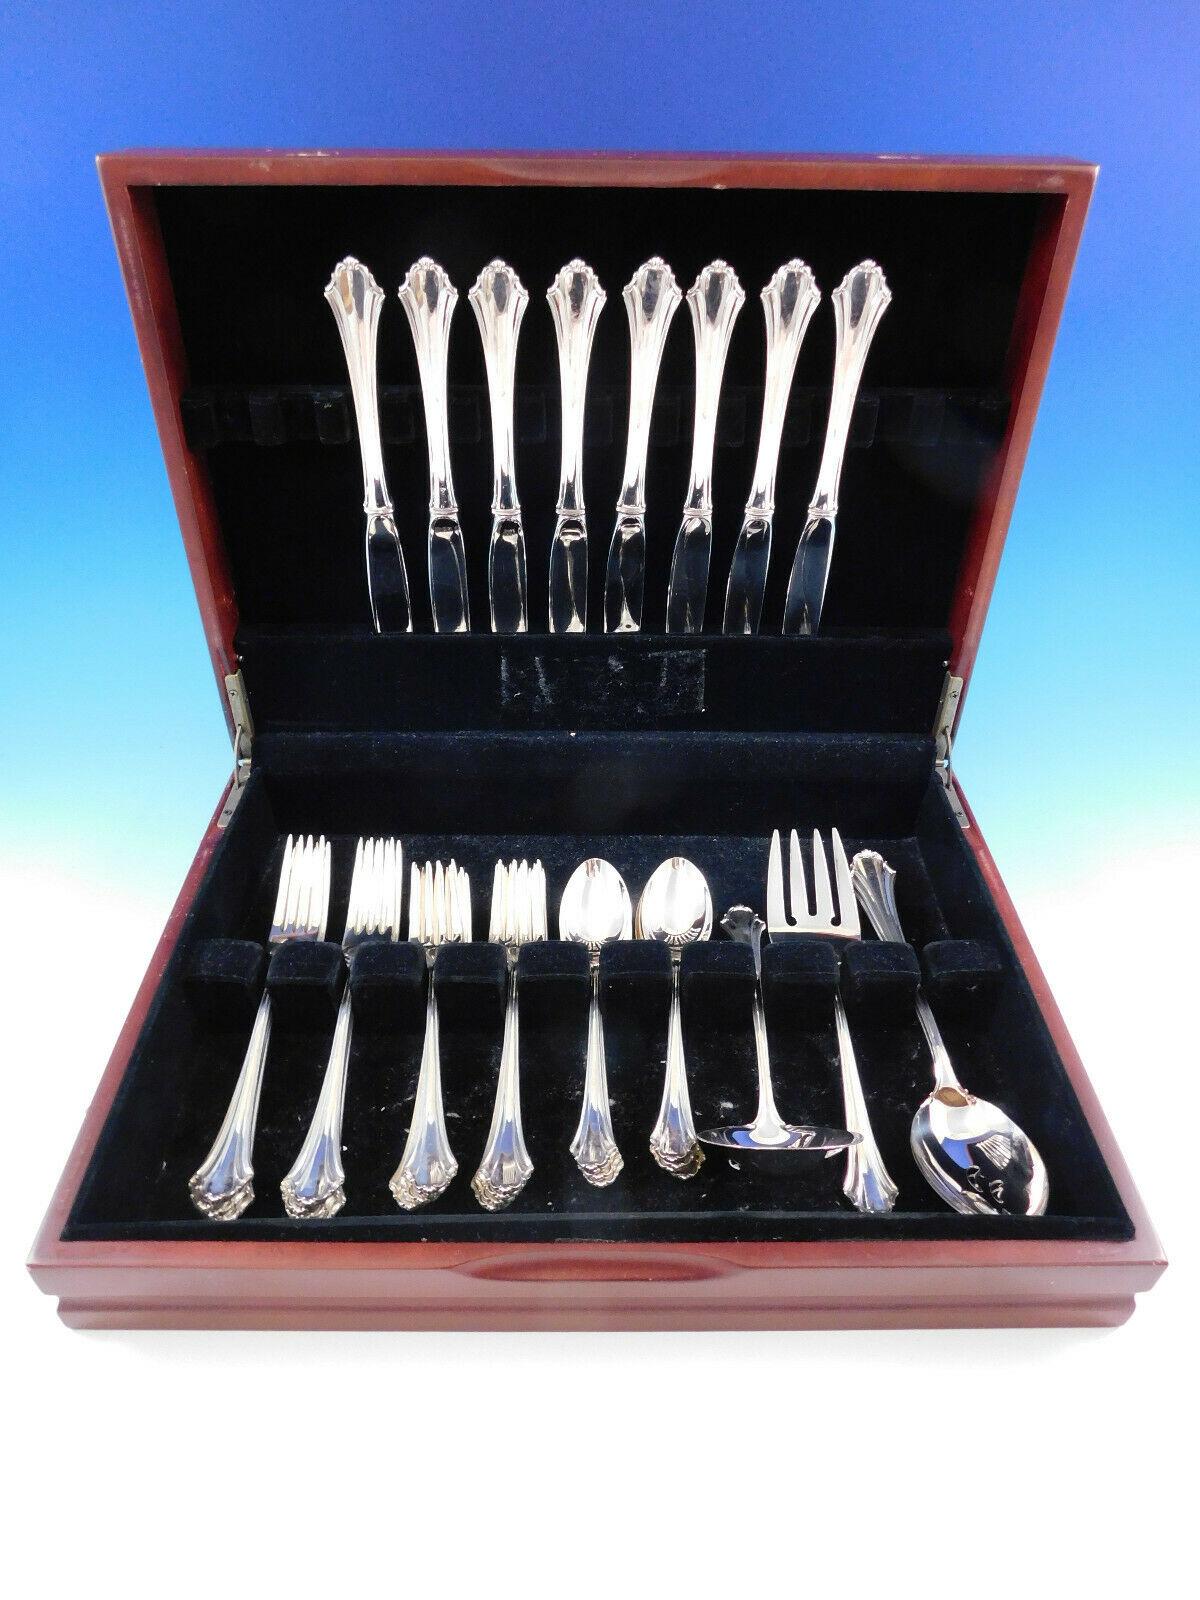 A masterful statement in fluid French Provincial, the Bel Chateau sterling silver flatware pattern from Lunt is meticulously designed and exhibits elegance in its refined lines.

Bel Chateau by Lunt sterling silver Flatware set, 36 pieces. This